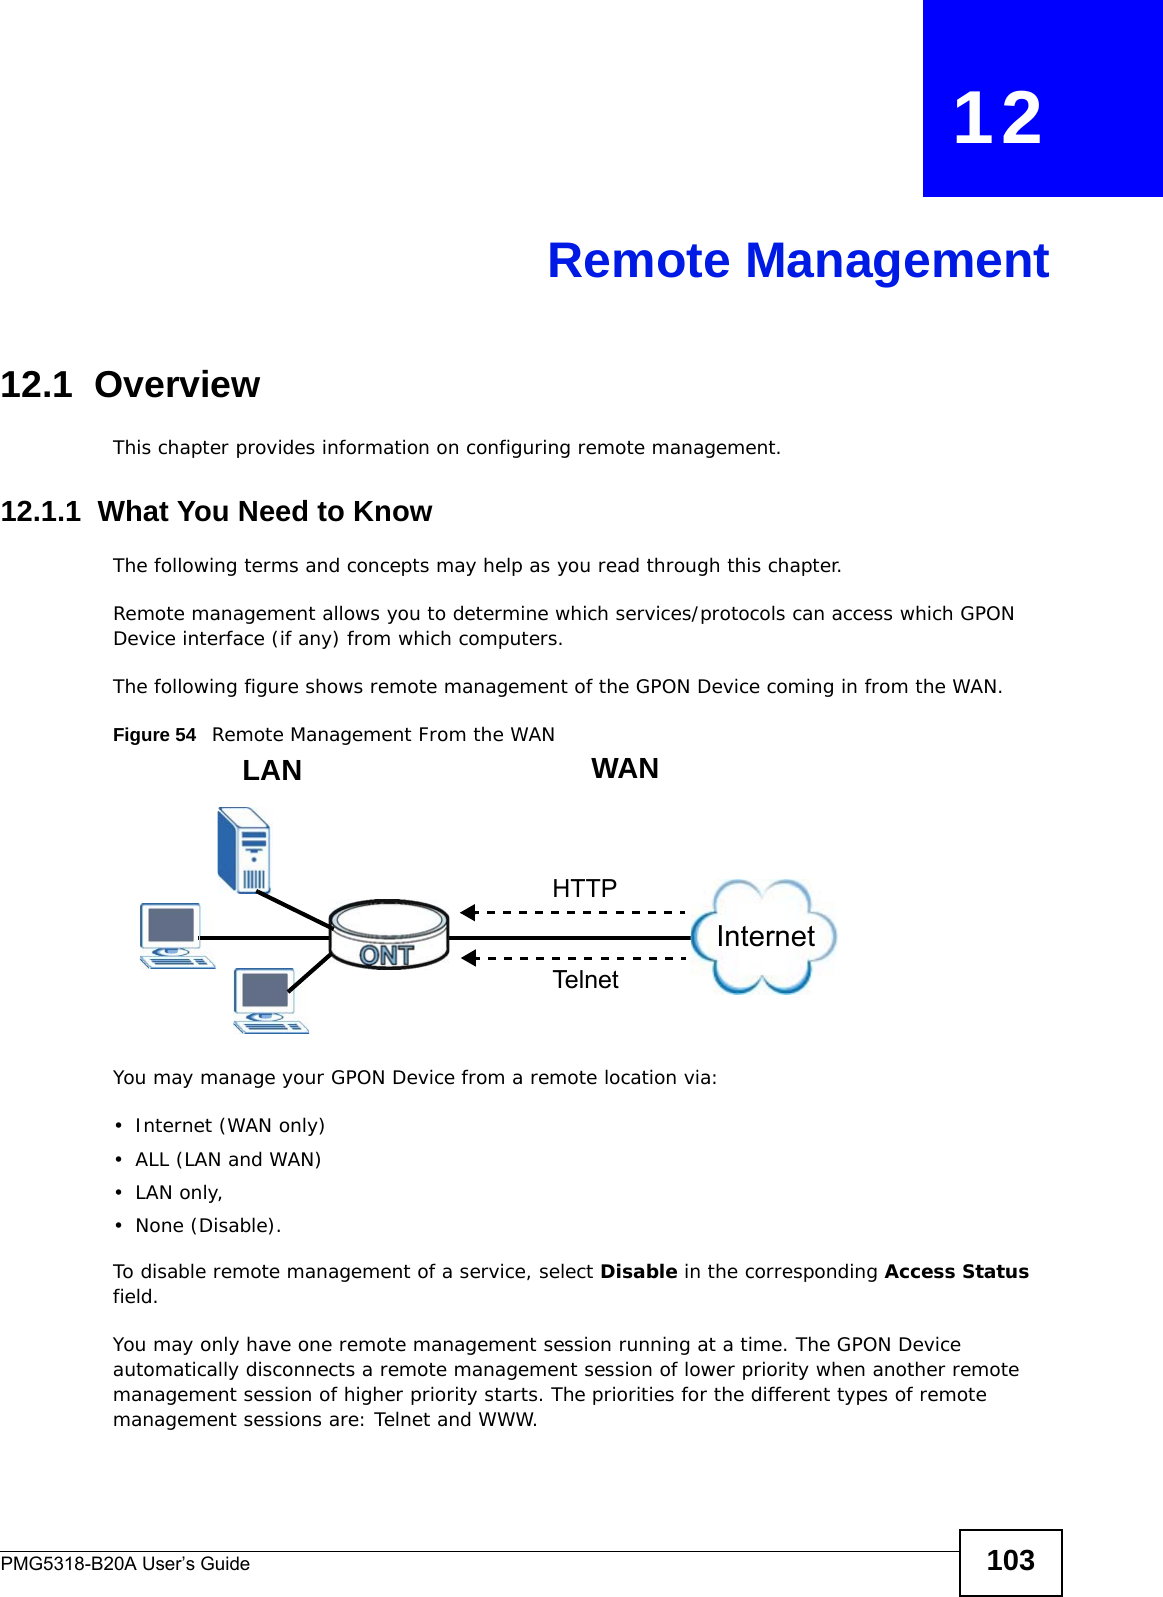 PMG5318-B20A User’s Guide 103CHAPTER   12Remote Management12.1  OverviewThis chapter provides information on configuring remote management.12.1.1  What You Need to KnowThe following terms and concepts may help as you read through this chapter.Remote management allows you to determine which services/protocols can access which GPON Device interface (if any) from which computers.The following figure shows remote management of the GPON Device coming in from the WAN.Figure 54   Remote Management From the WANYou may manage your GPON Device from a remote location via:• Internet (WAN only)•ALL (LAN and WAN)•LAN only, • None (Disable).To disable remote management of a service, select Disable in the corresponding Access Status field.You may only have one remote management session running at a time. The GPON Device automatically disconnects a remote management session of lower priority when another remote management session of higher priority starts. The priorities for the different types of remote management sessions are: Telnet and WWW.LAN WANHTTPTelnetInternet